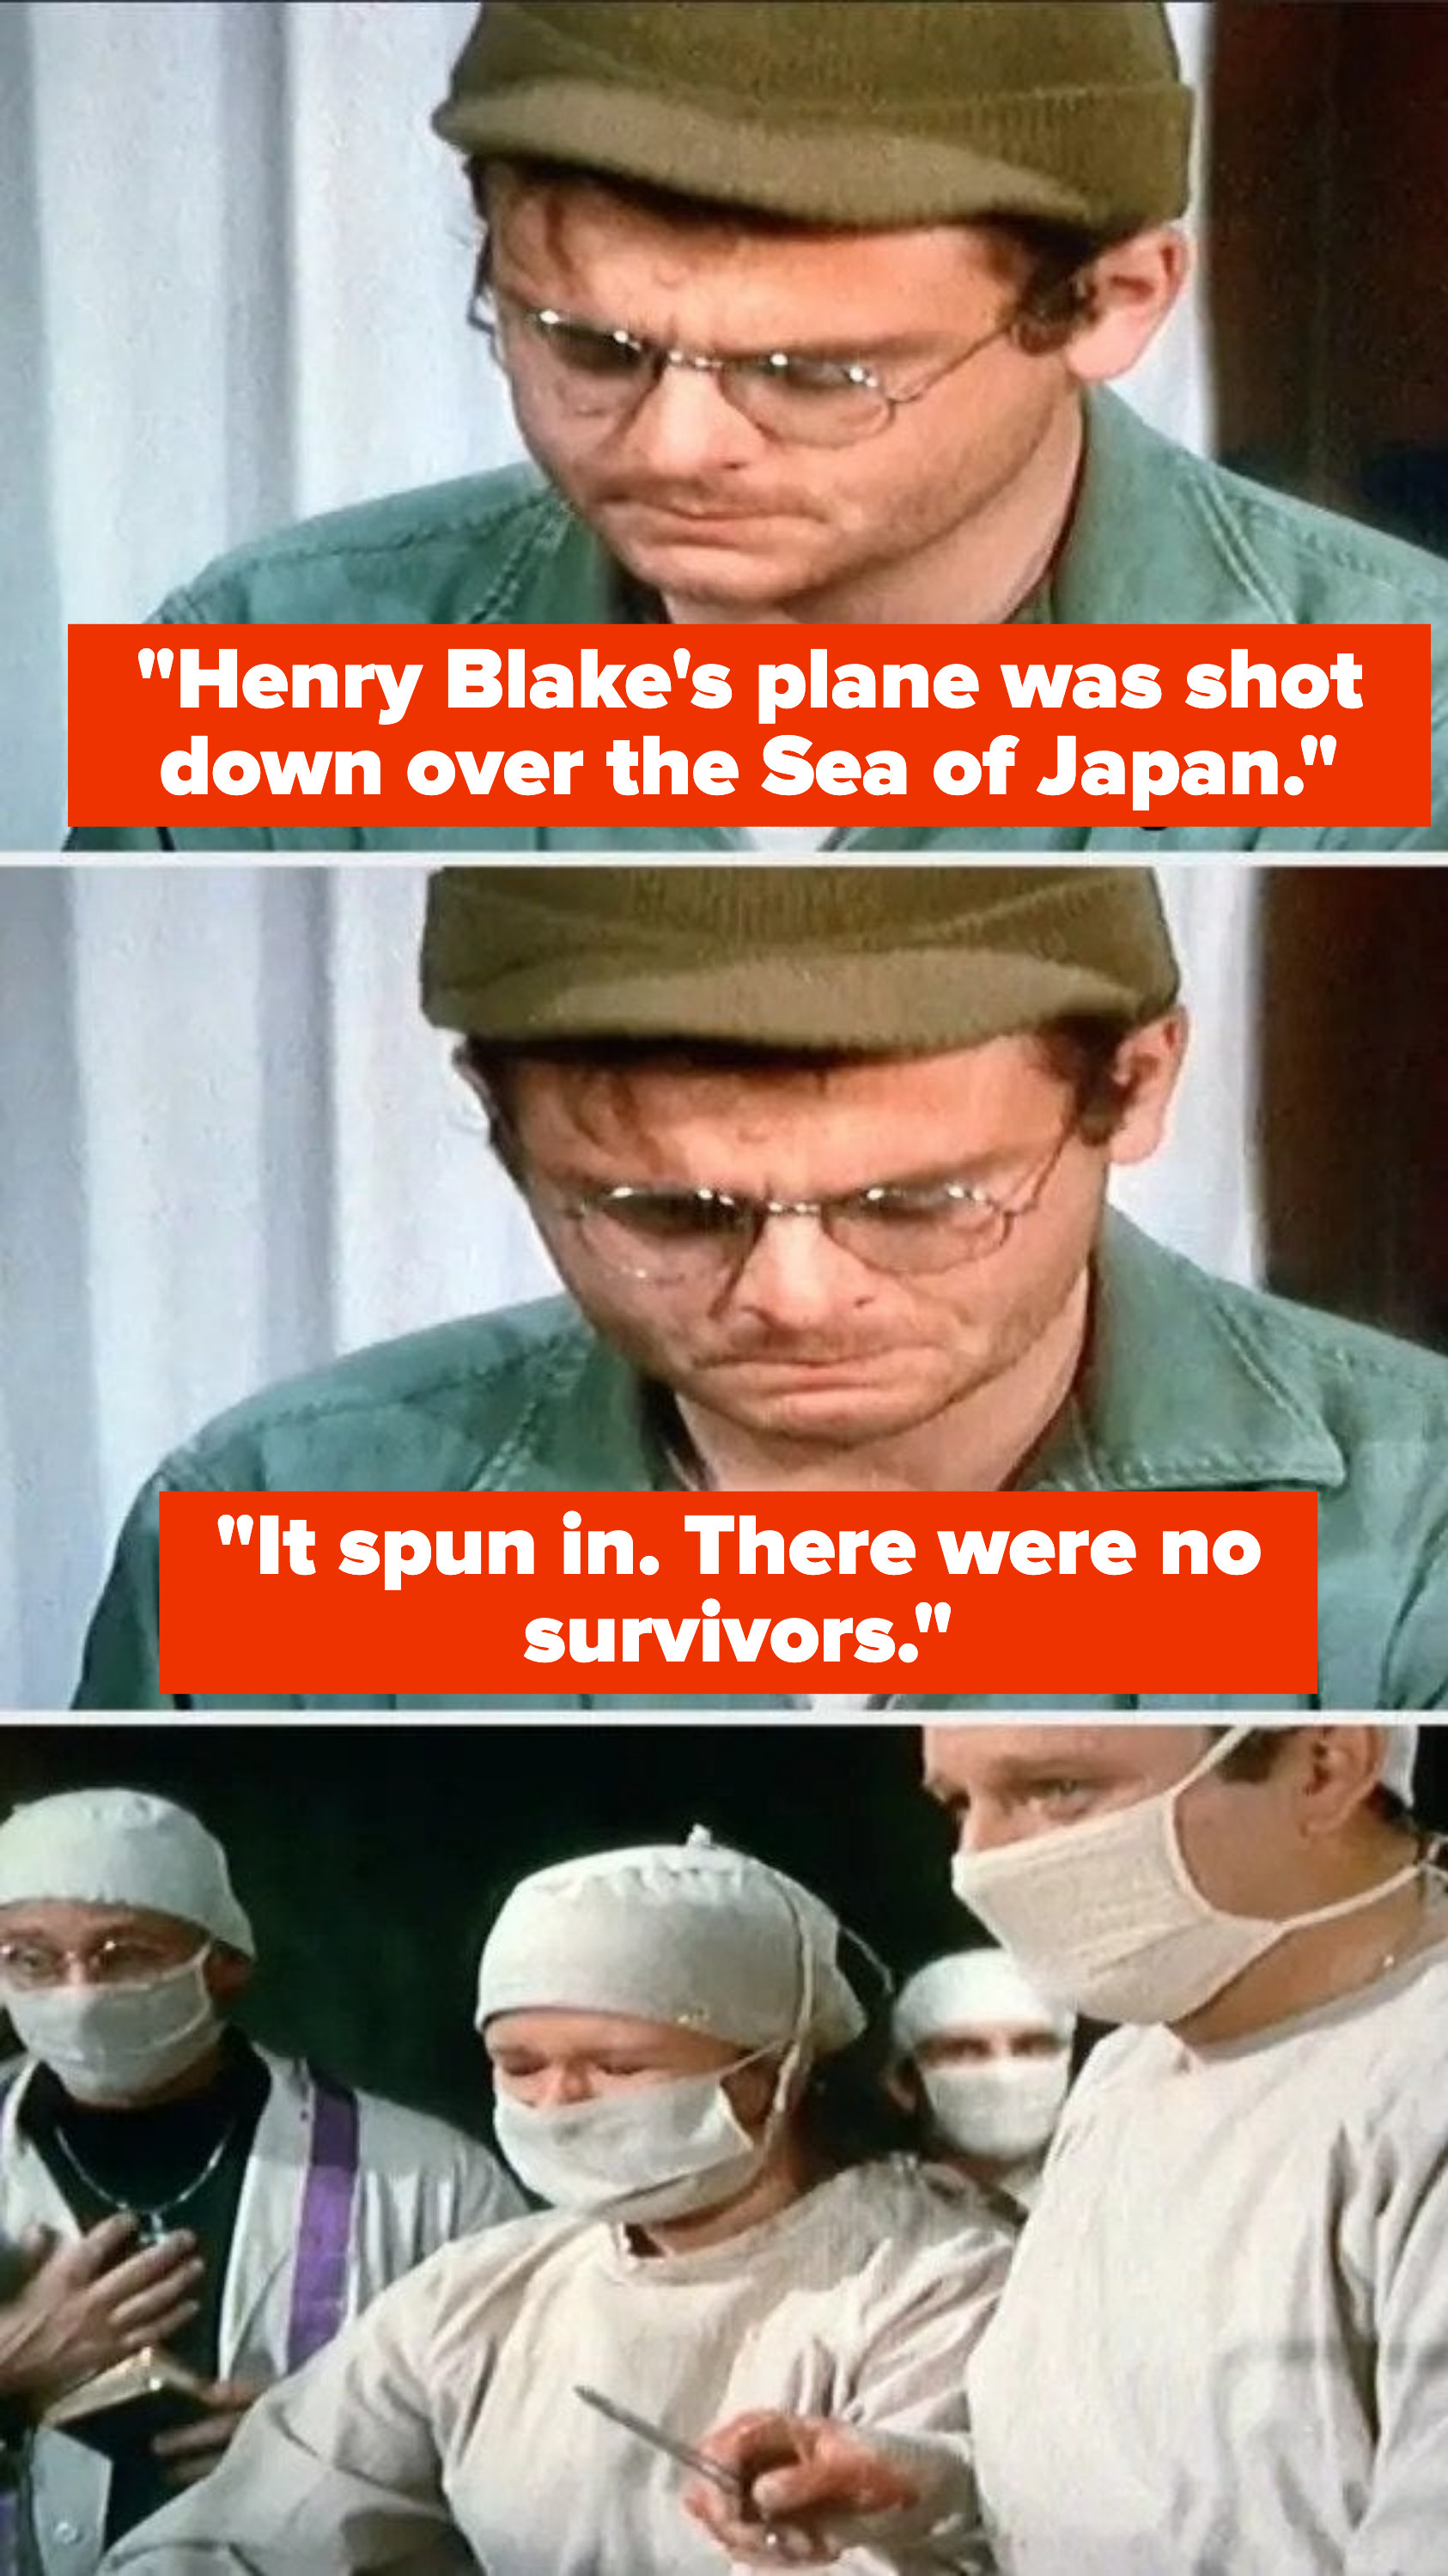 Radar says Henry&#x27;s plane was shot down over Sea of Japan and spun out, and that there were no survivors